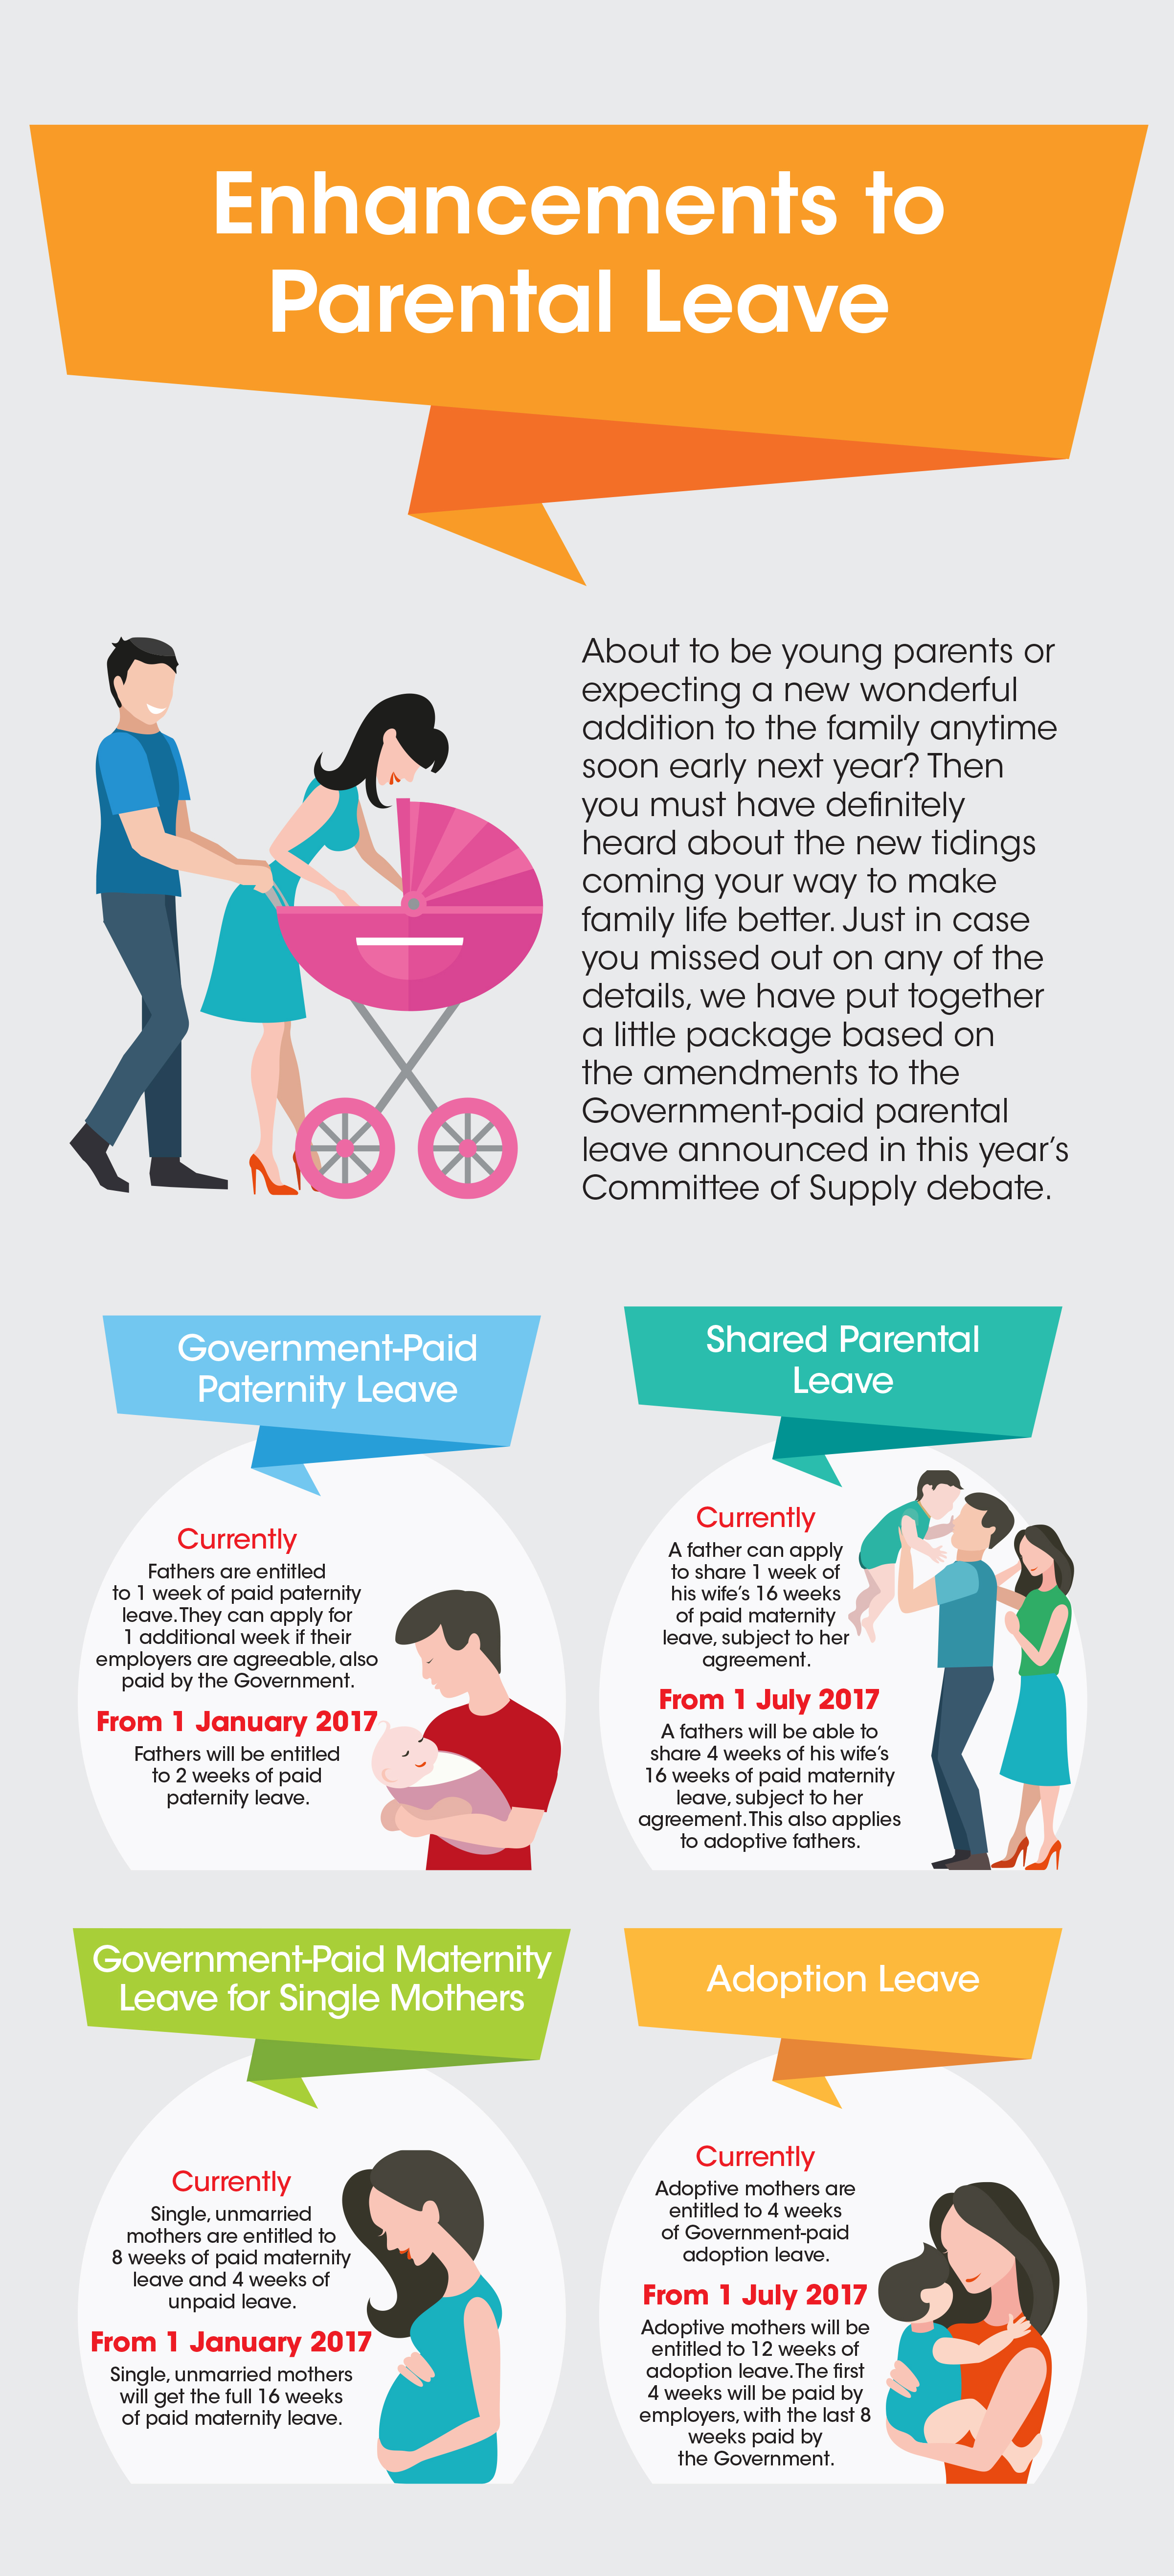 Parental Leave Enhancements You Can Look Forward To LabourBeat